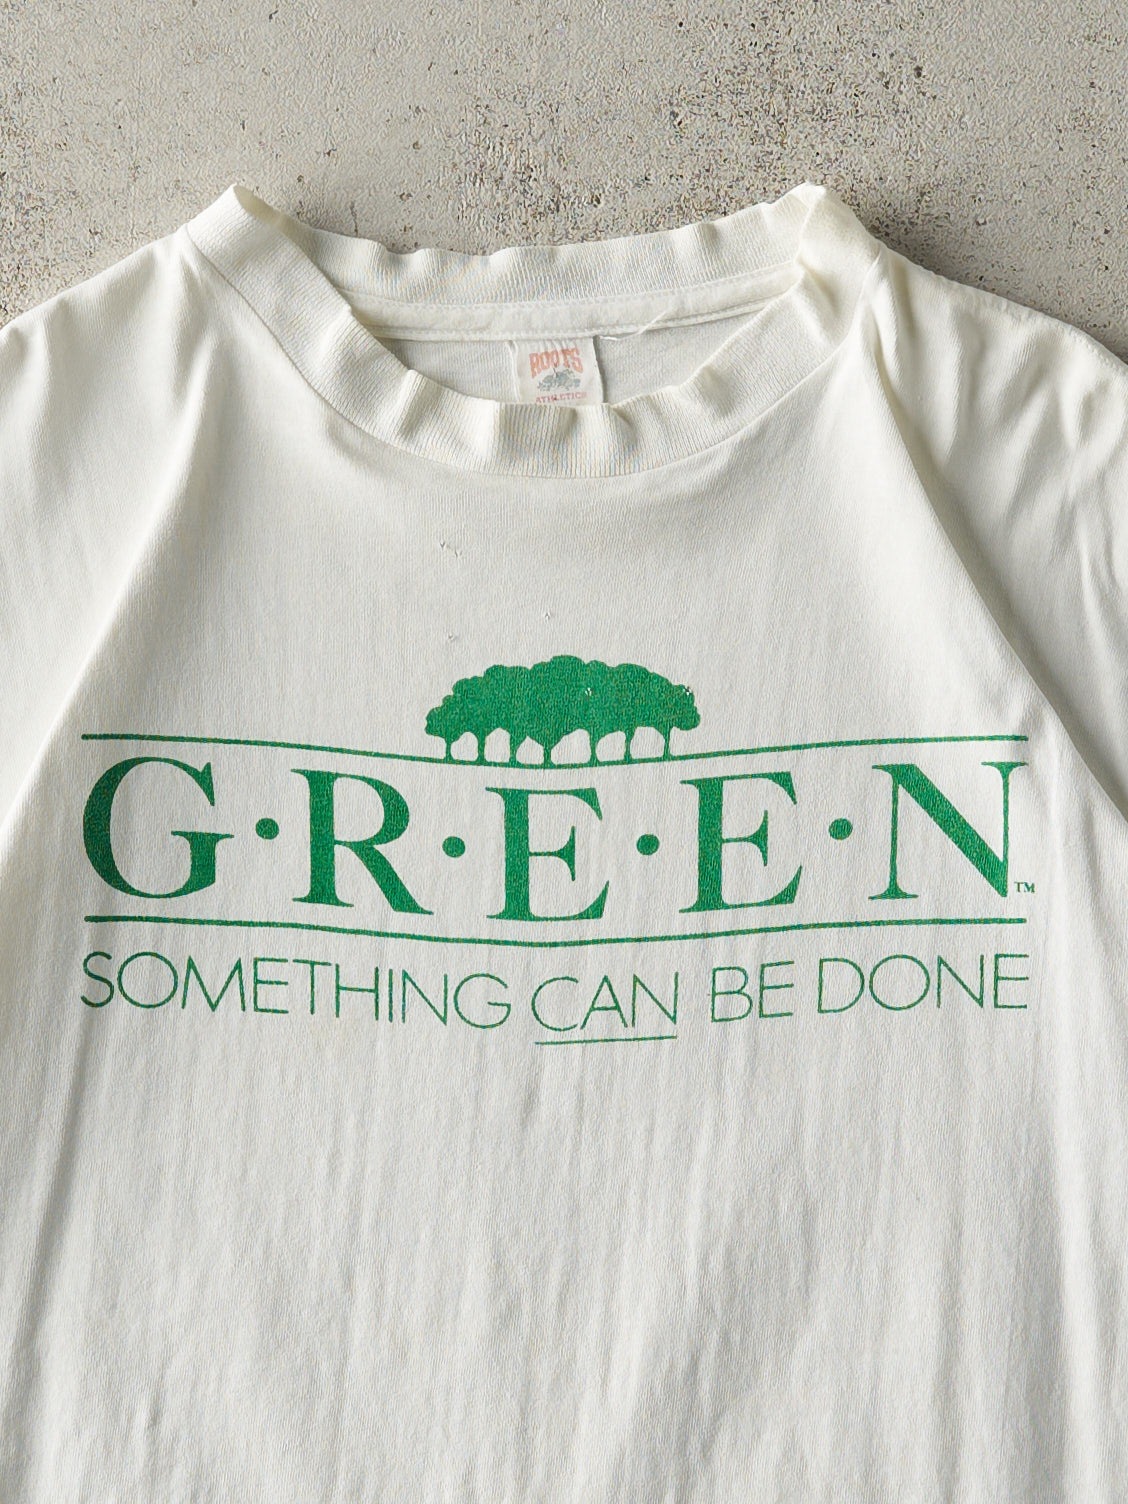 Vintage 90s White Something Can Be Done Single Stitch Tee (M)